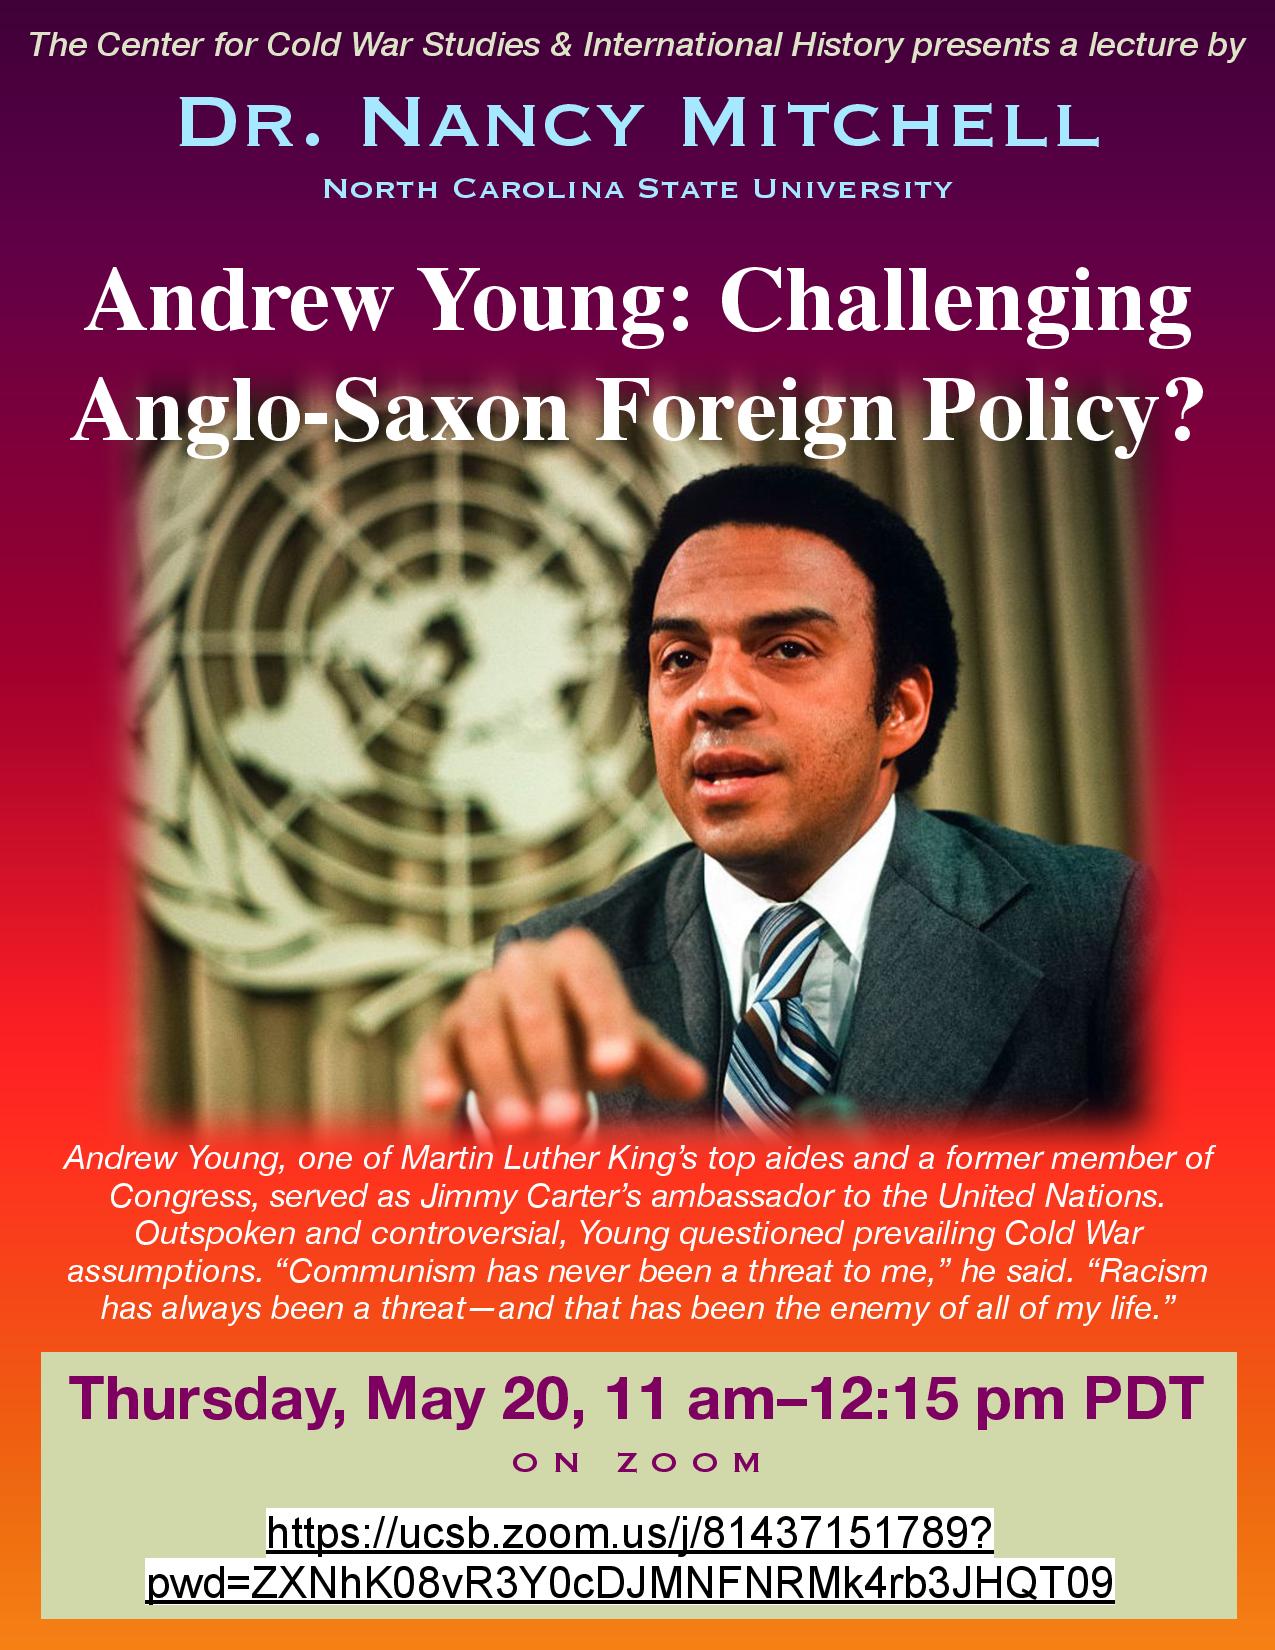 Flyer for Zoom talk for The Center of Cold War Studies & International History by Dr. Nancy Mitchel - Andrew Young: Challenging Anglo-Saxon Foreign Policy on 5/20/21 from 11AM to 12:15PM PDT